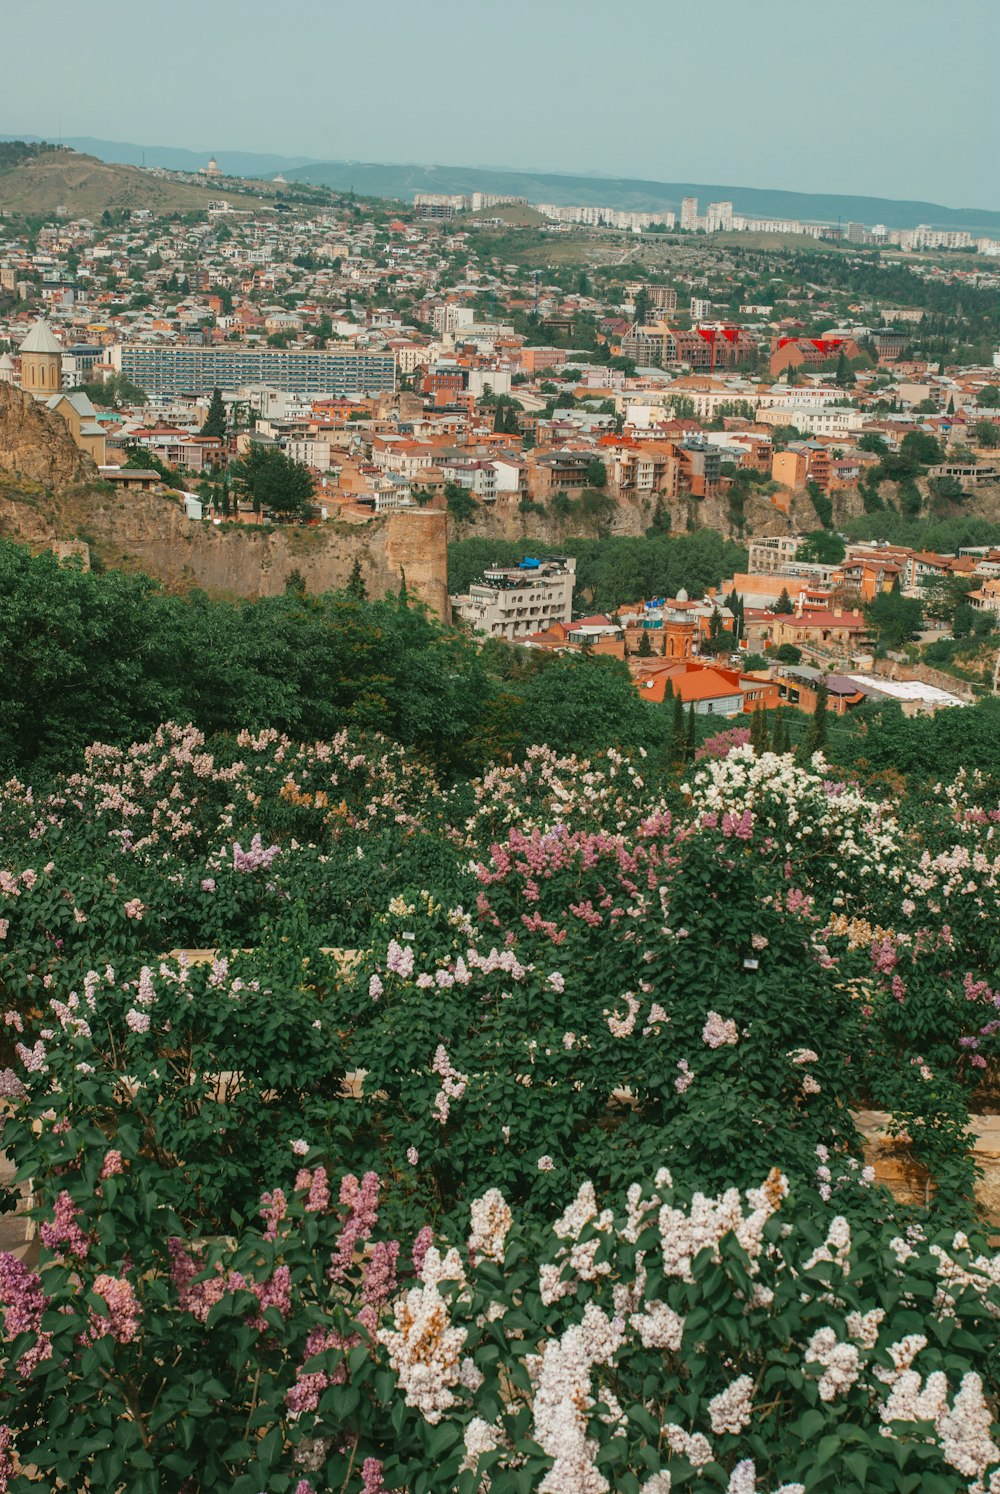 a view of a city from a hill covered in flowers